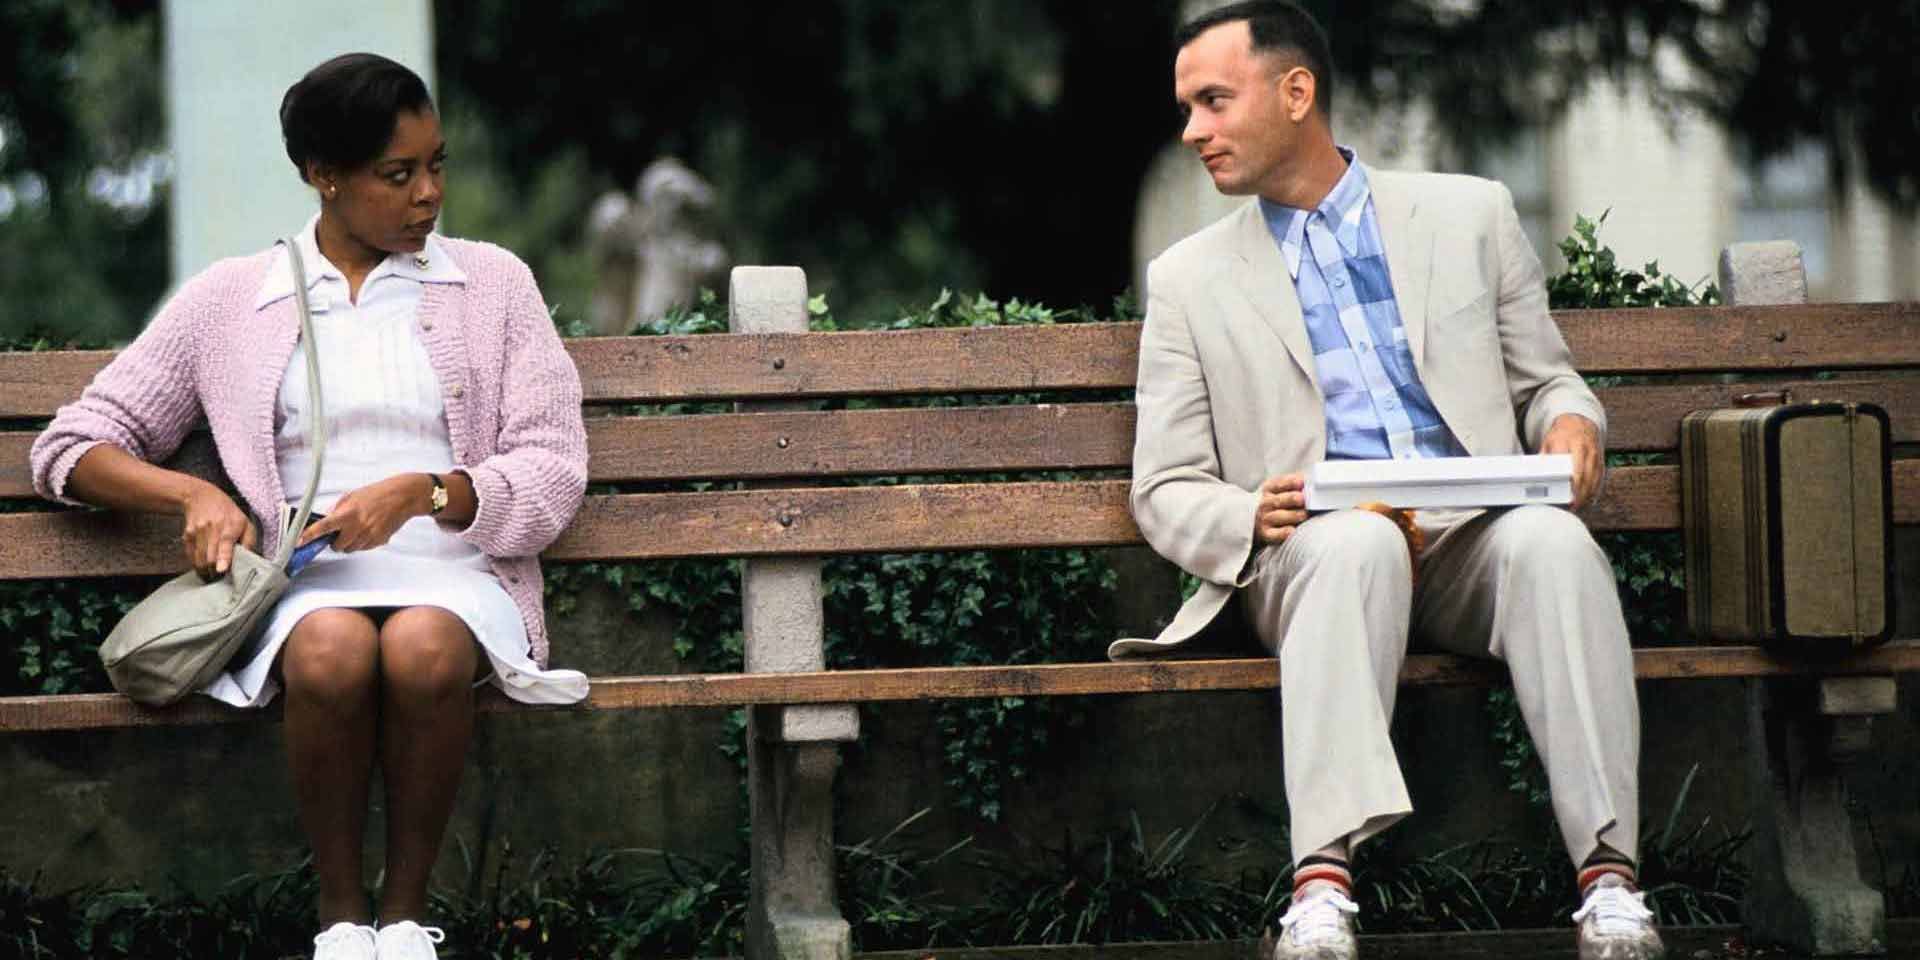 Forrest Gump talking to a woman on the bench in Forrest Gump